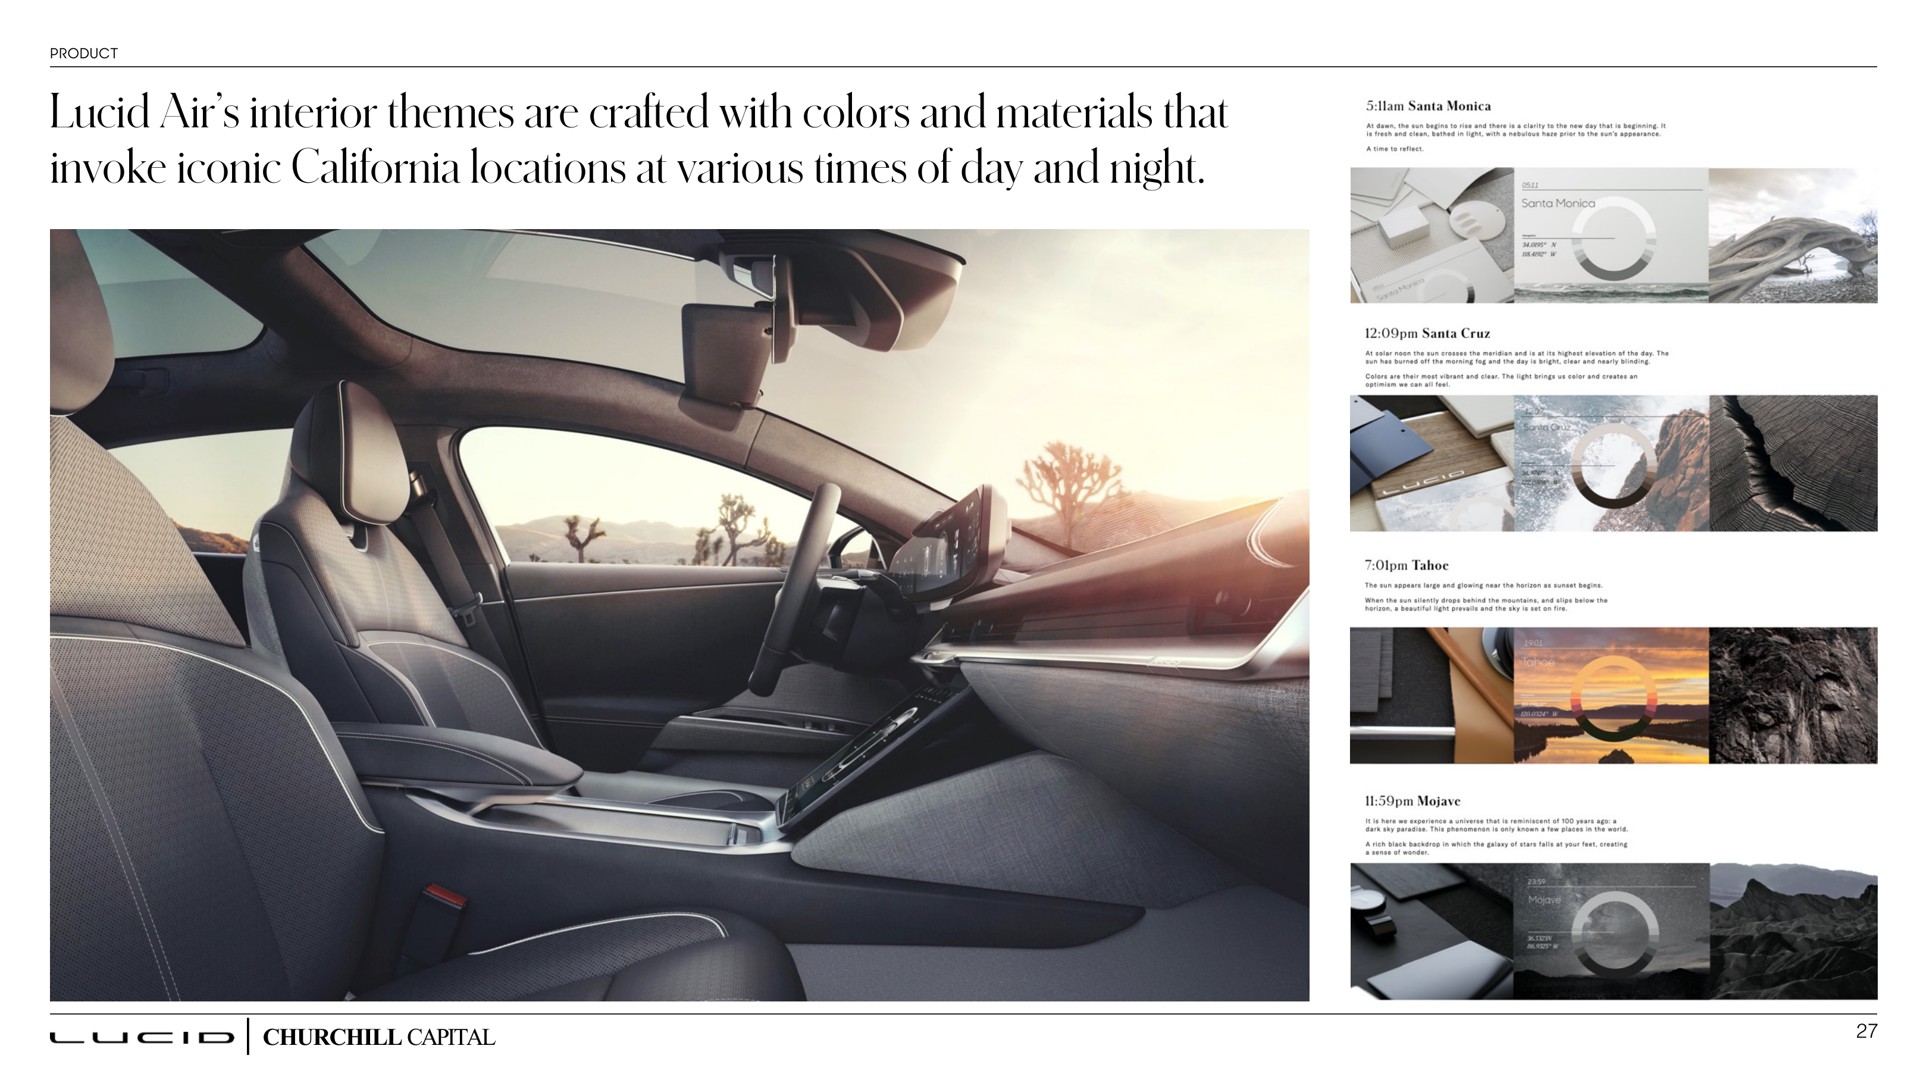 lucid air interior themes are crafted with colors and materials that invoke iconic locations at various times of day and night | Lucid Motors